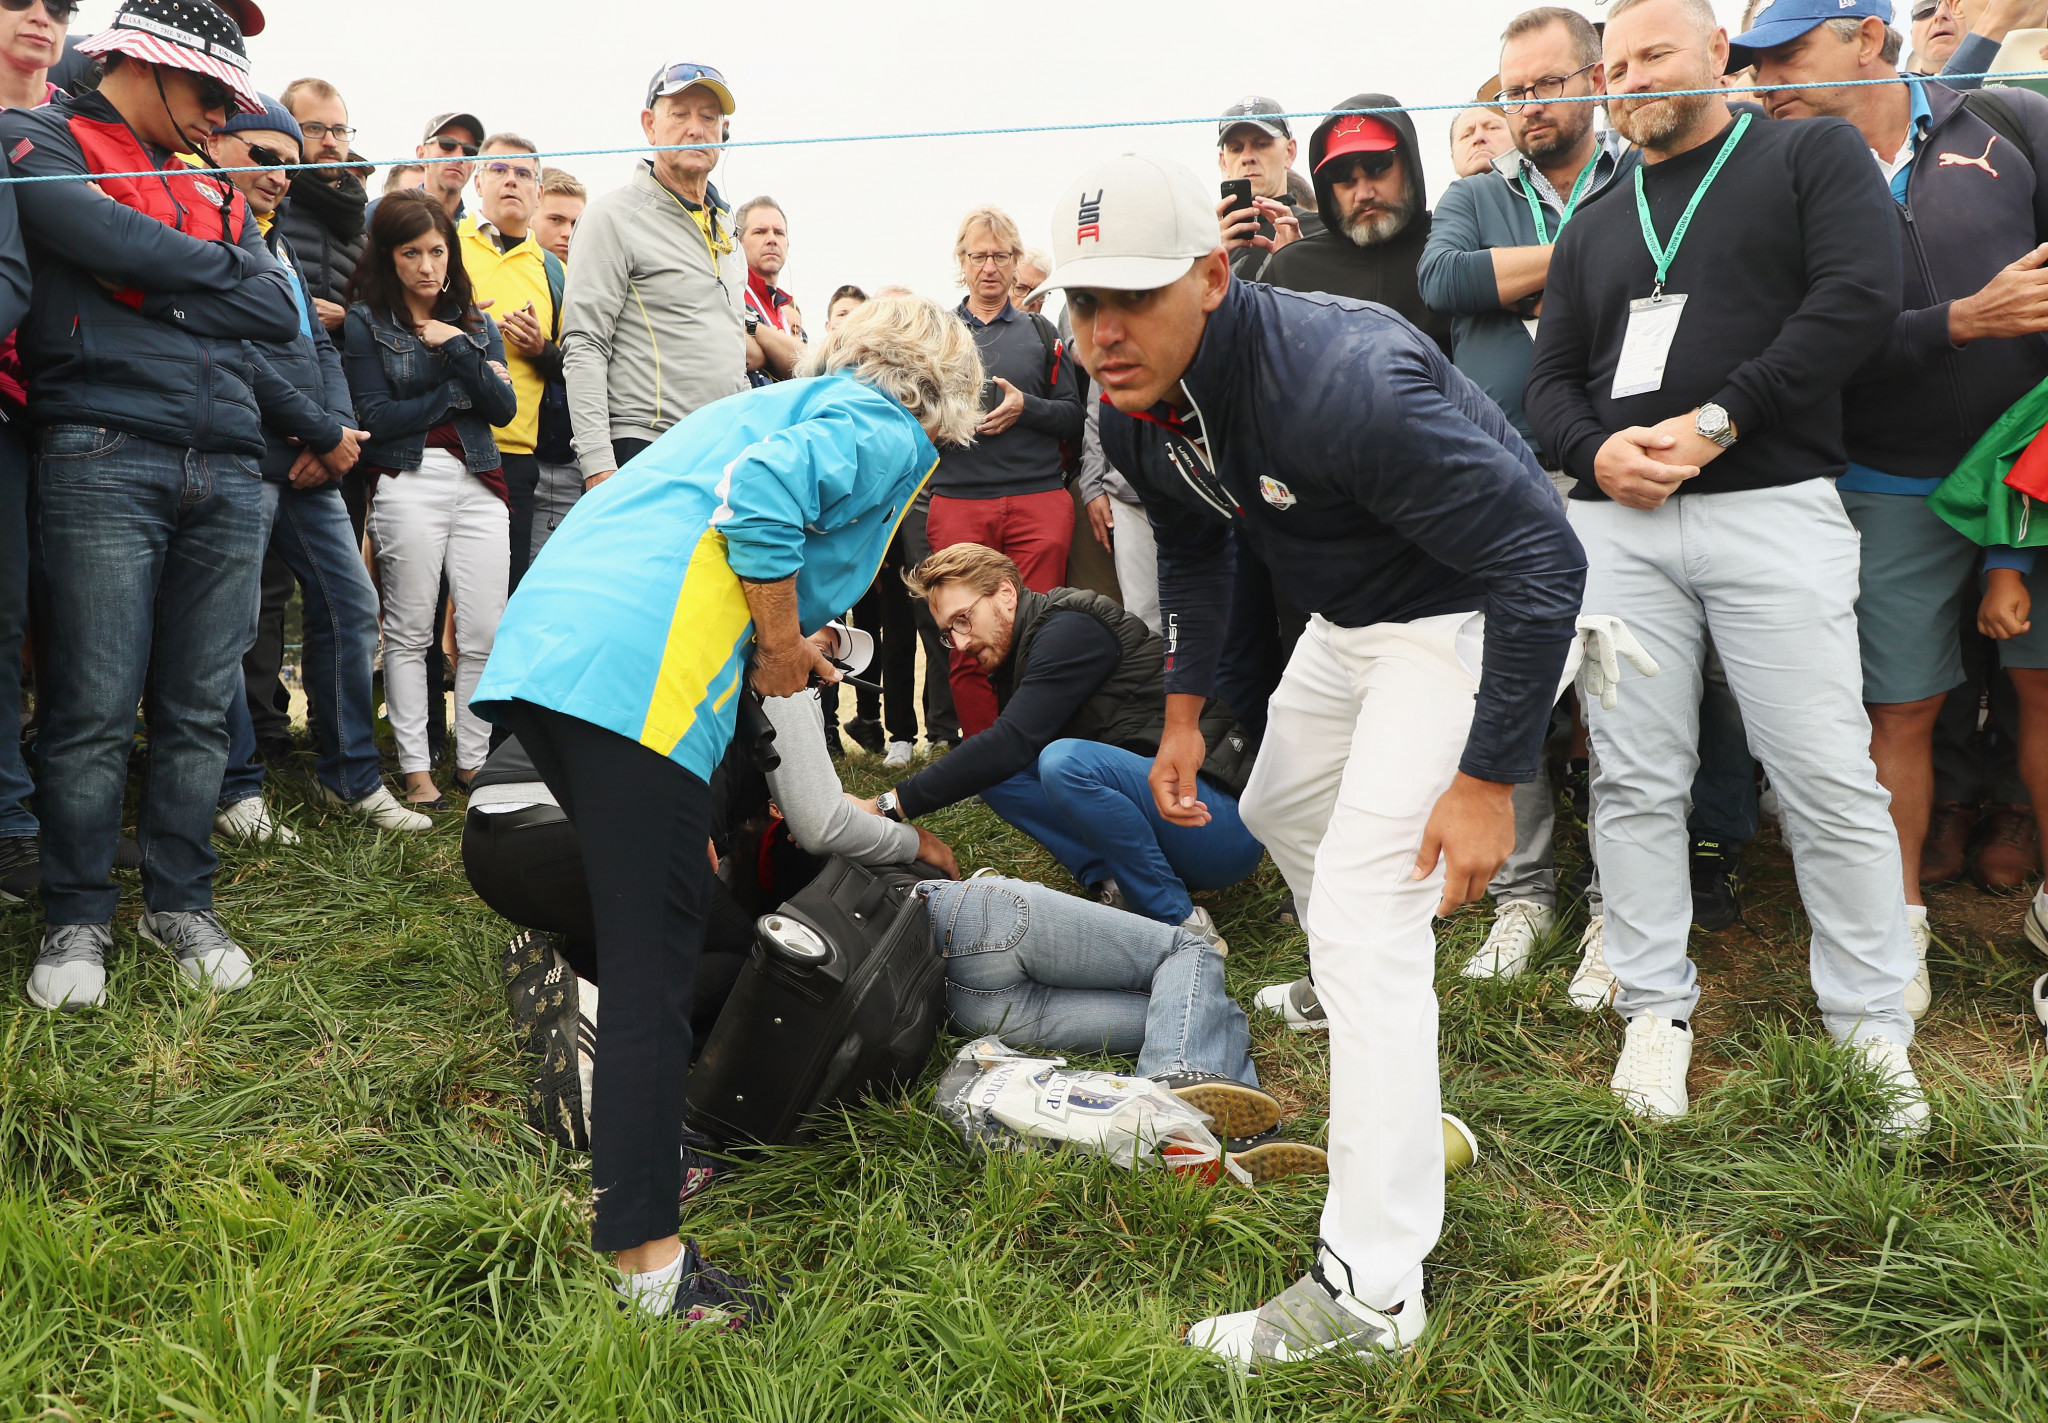 Brooks Koepka signed a glove and gave it to Corine Remande at the time of the incident ©Getty Images